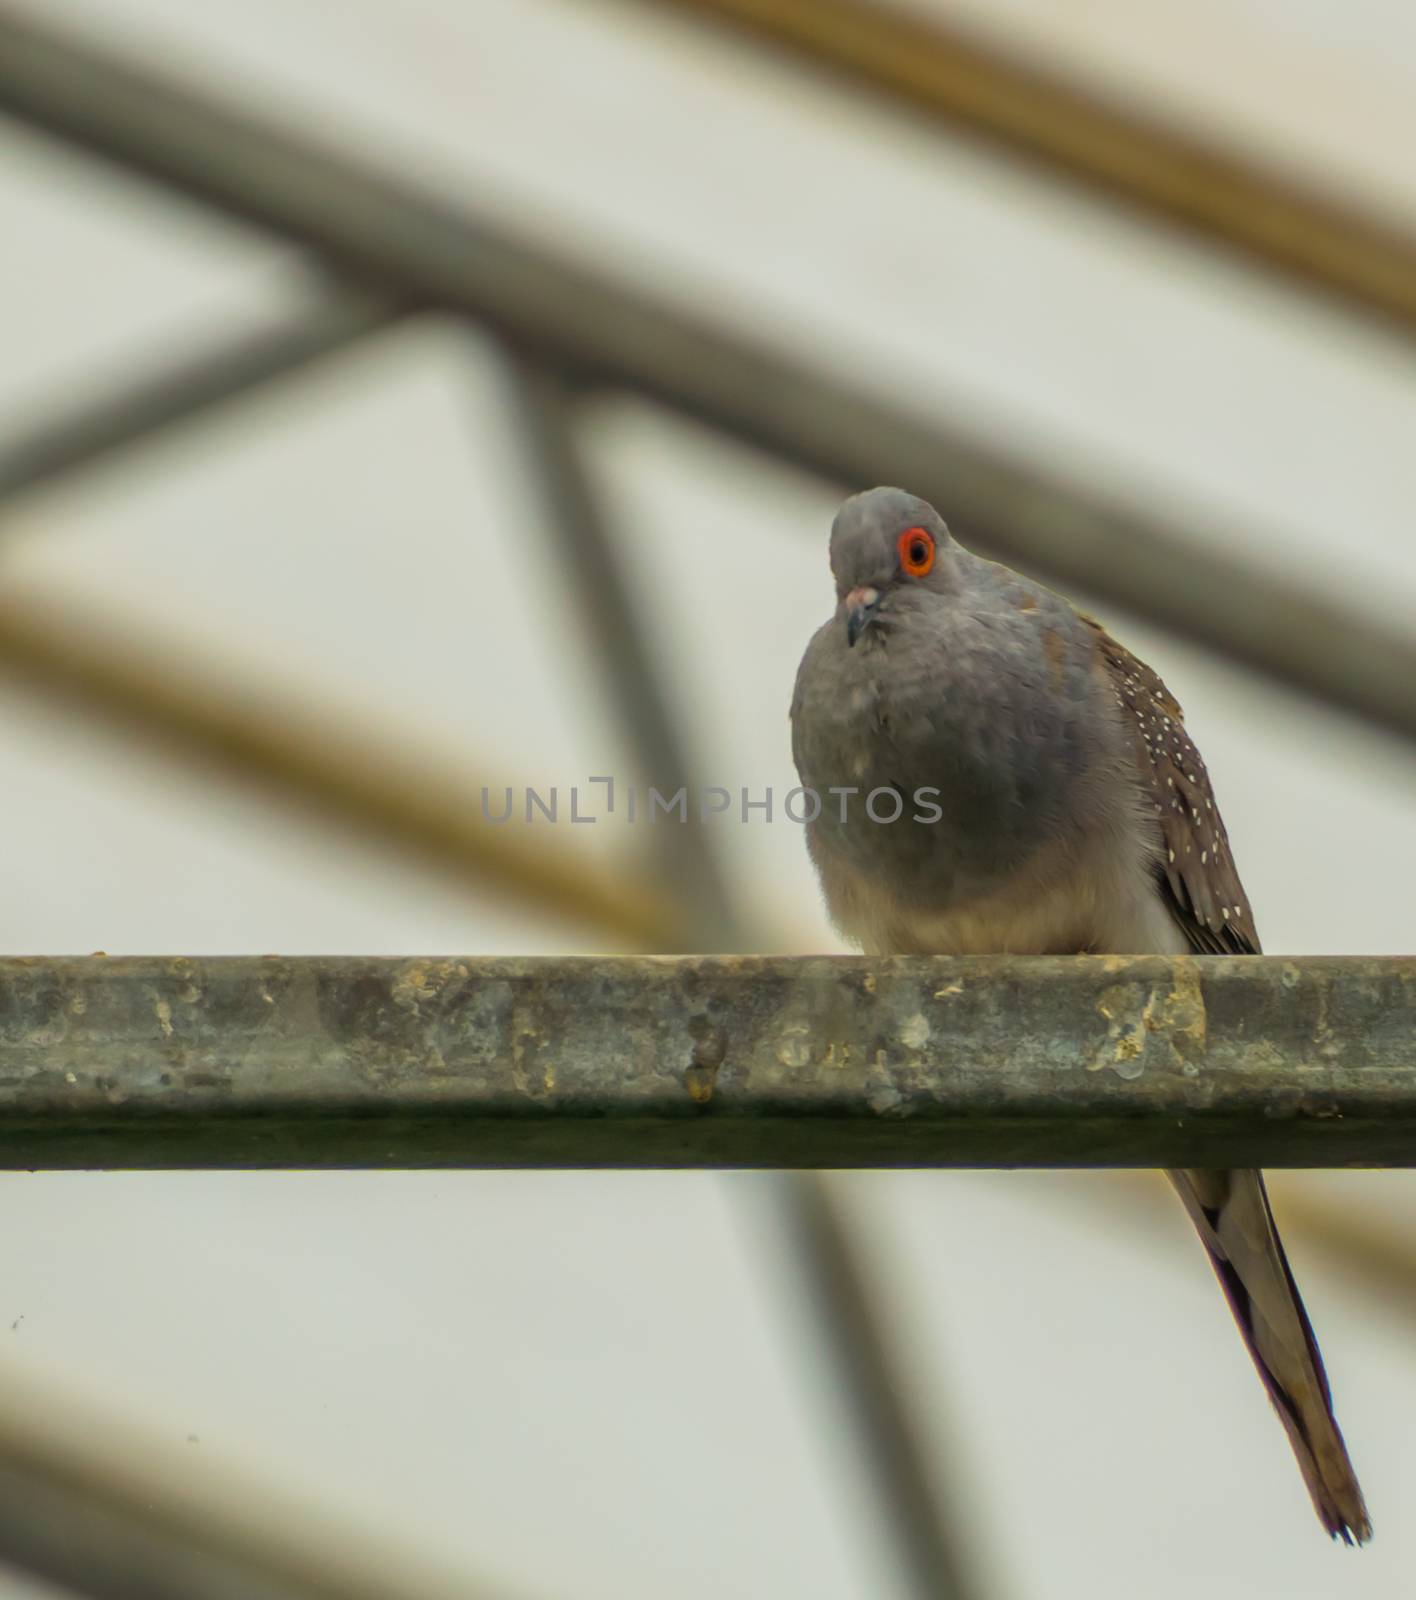 portrait of a diamond dove sitting on a metal beam in the aviary, small tropical pigeon from Australia